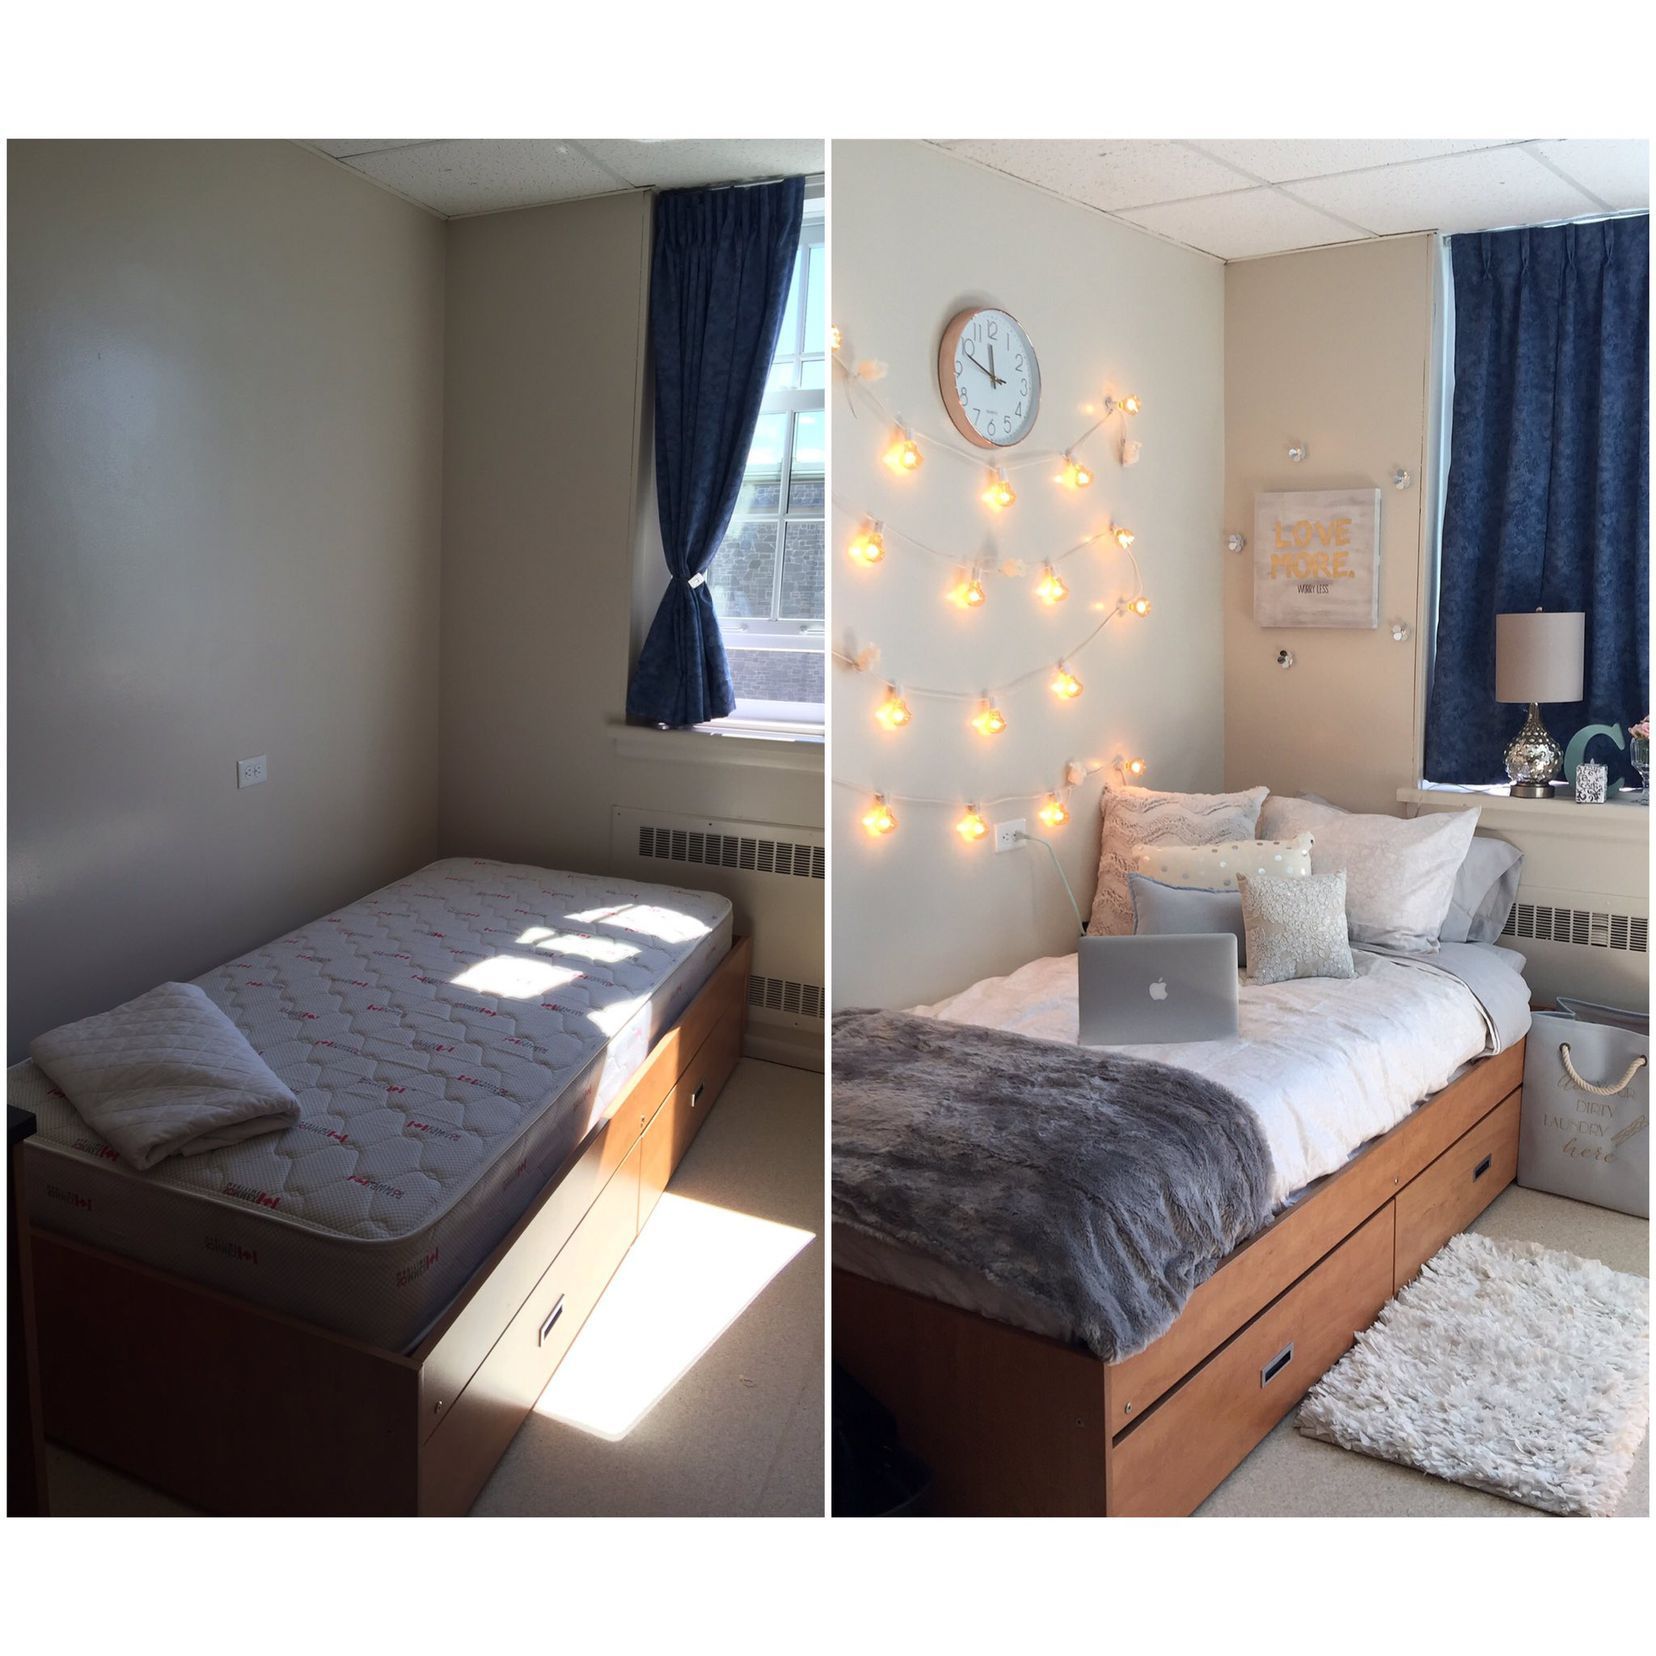 15 Insanely Cute Dorm Room Transformations To Try With Your Roommate -   15 room decor Dorm college students ideas